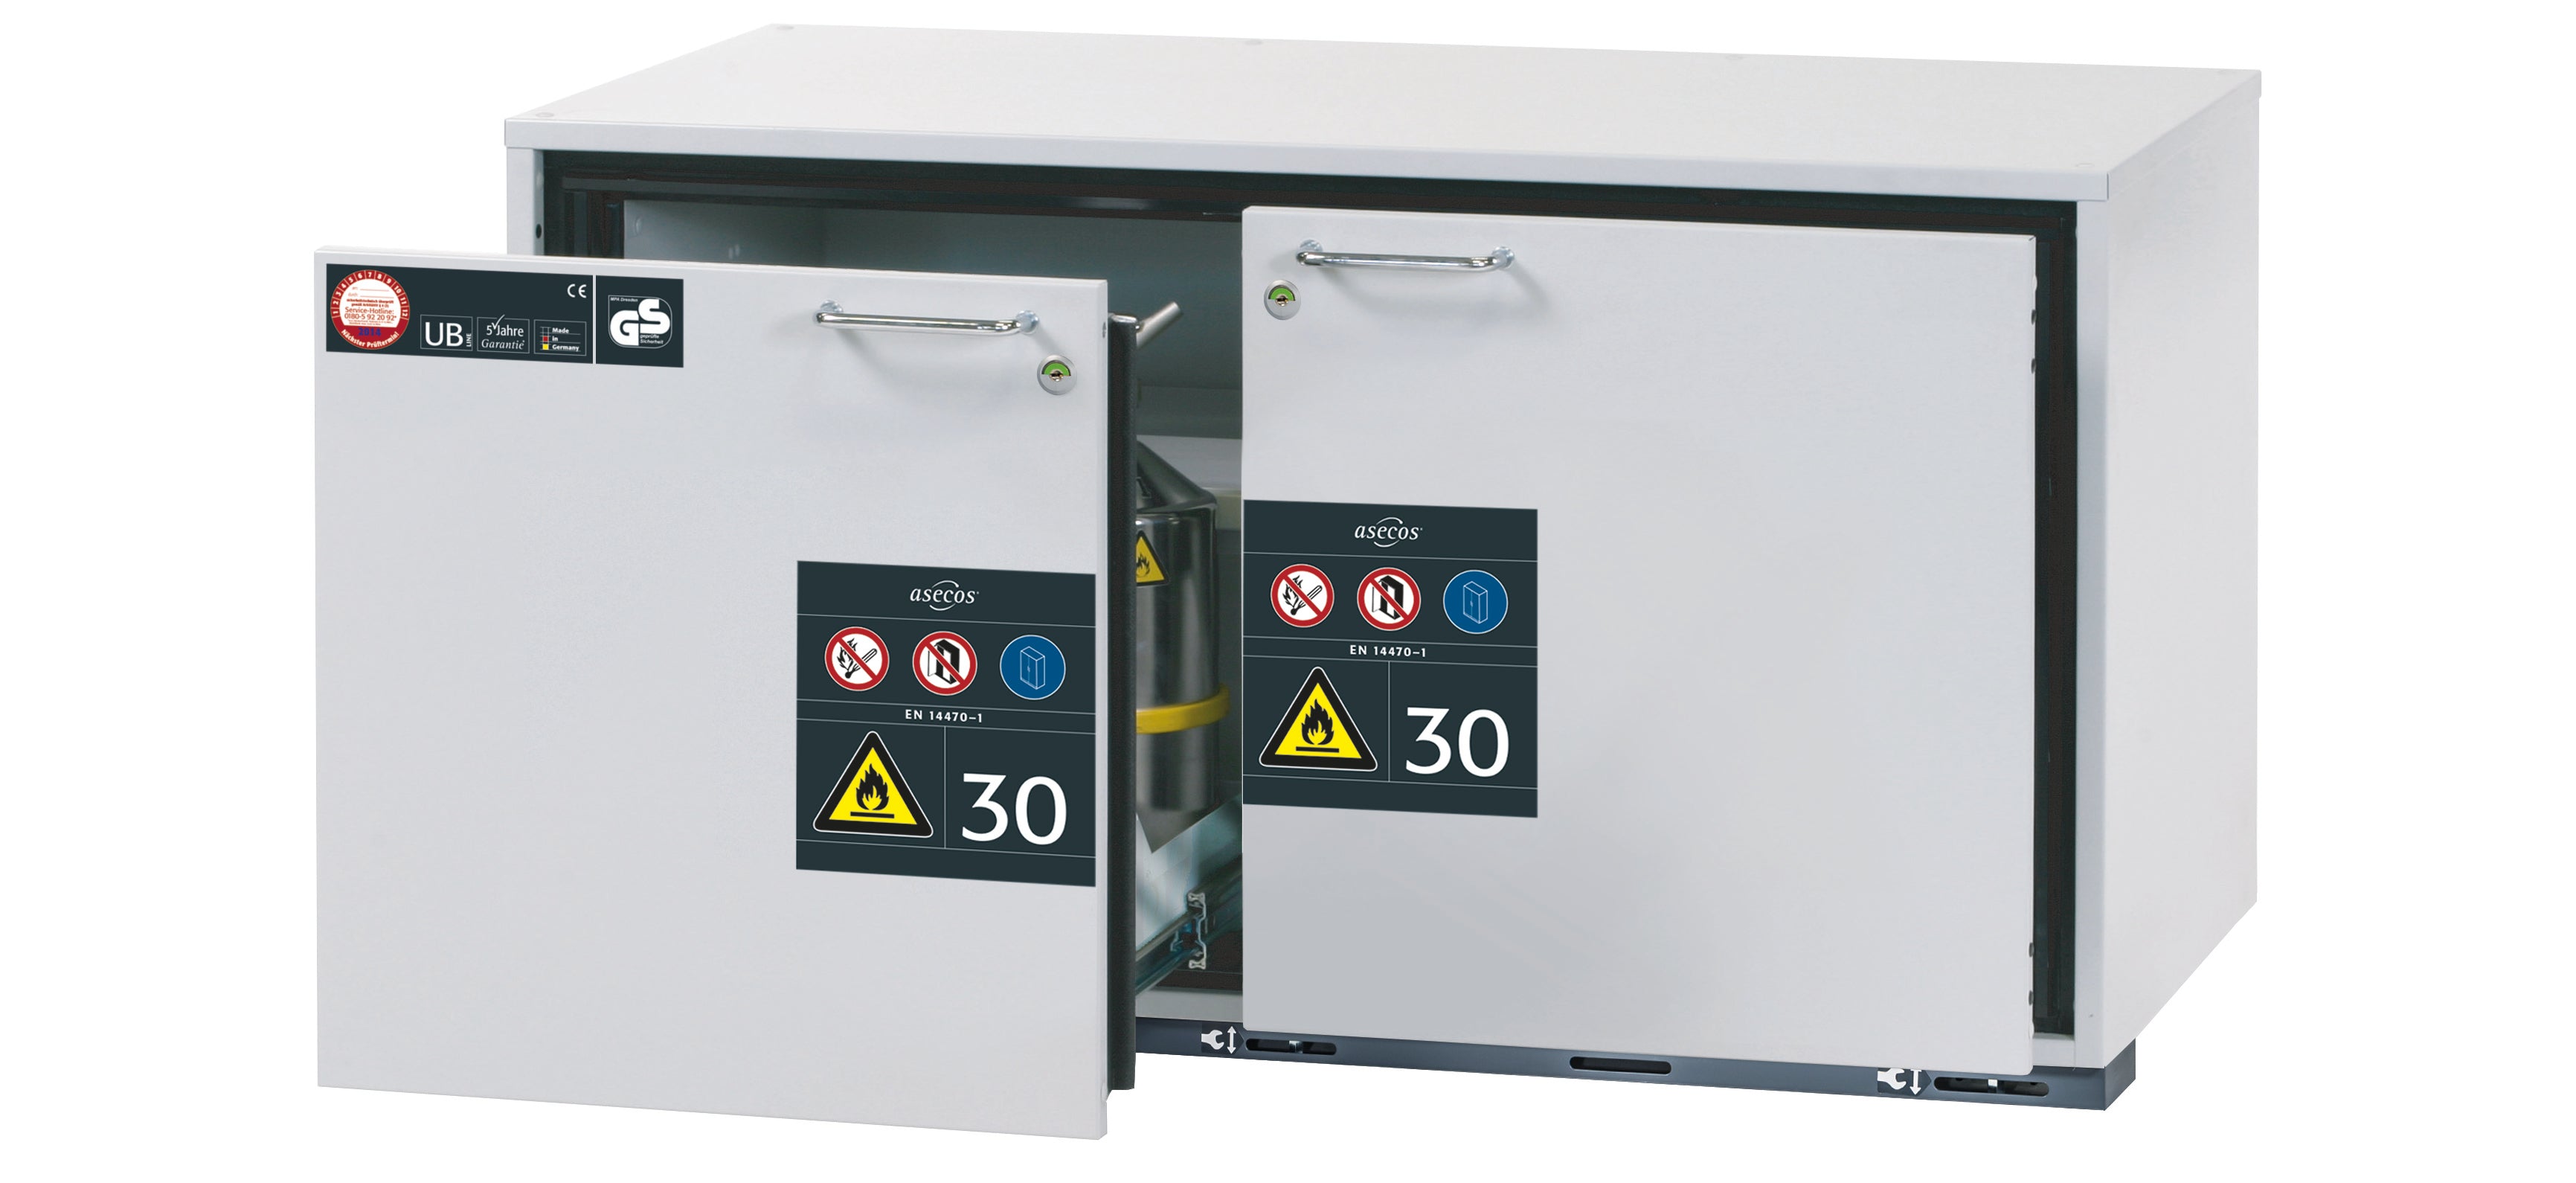 Type 30 safety base cabinet UB-S-30 model UB30.060.110.2S in light gray RAL 7035 with 2x drawer tray STAWA-R (stainless steel 1.4301)